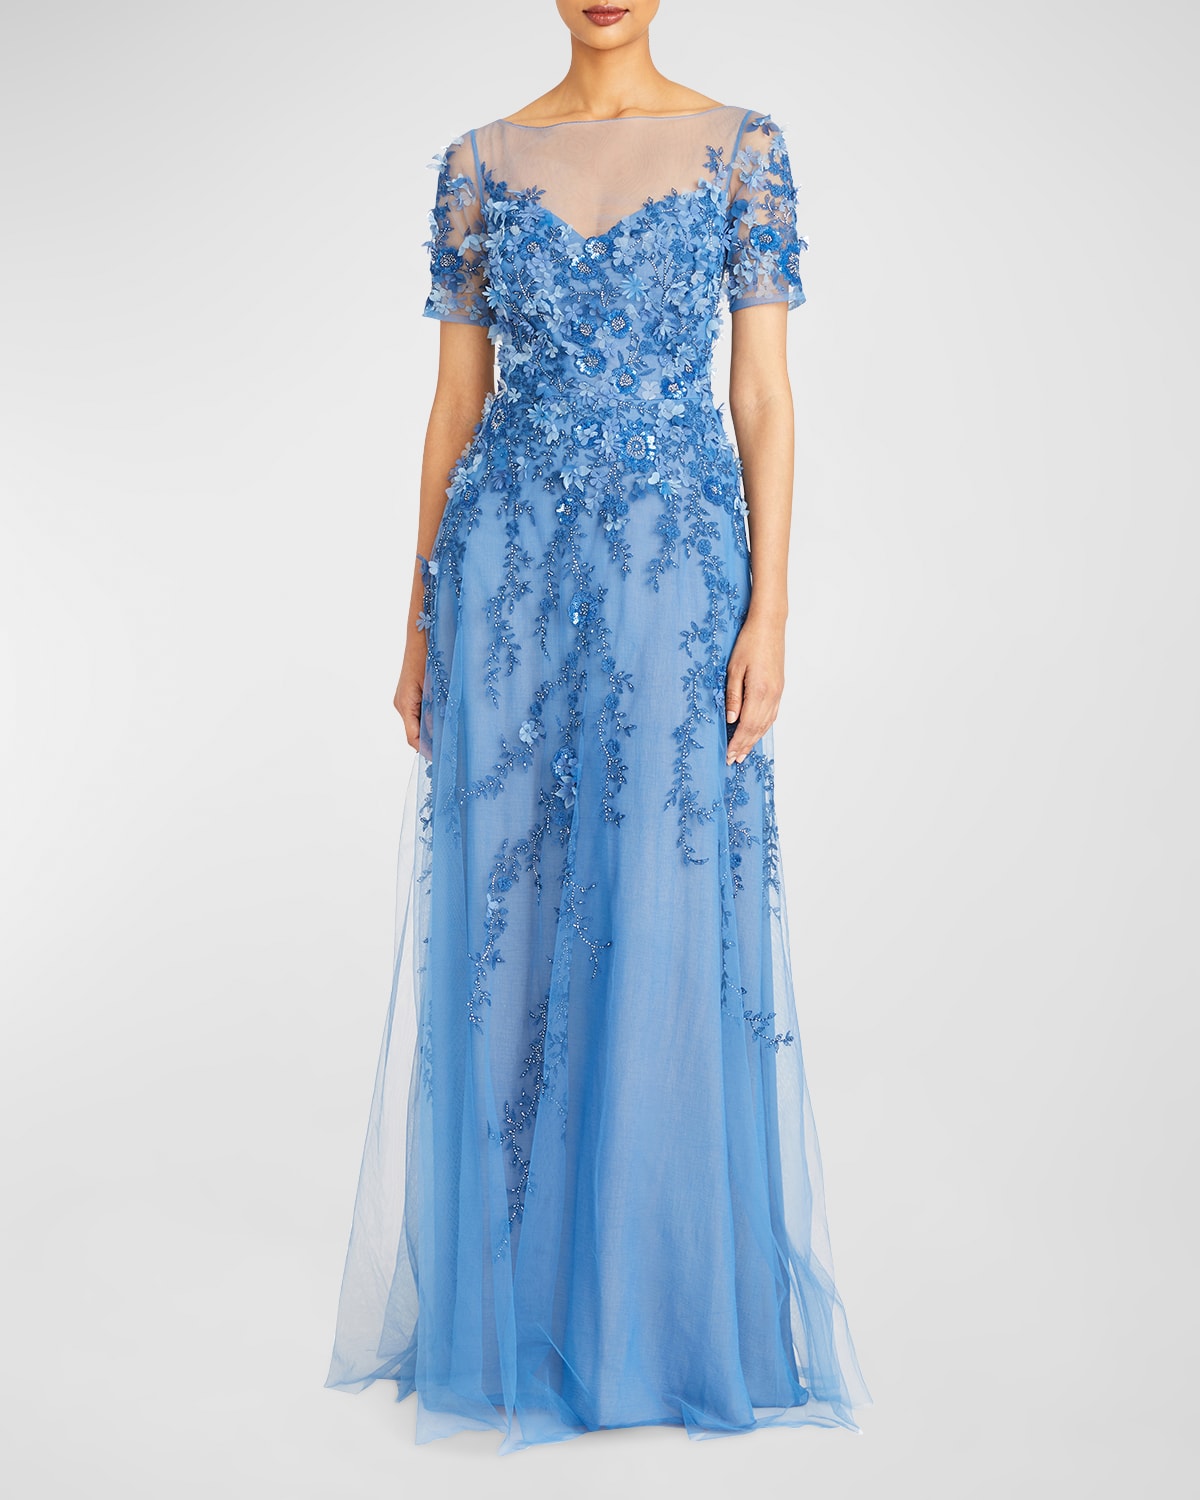 THEIA MARGARET BEADED APPLIQUE A-LINE GOWN